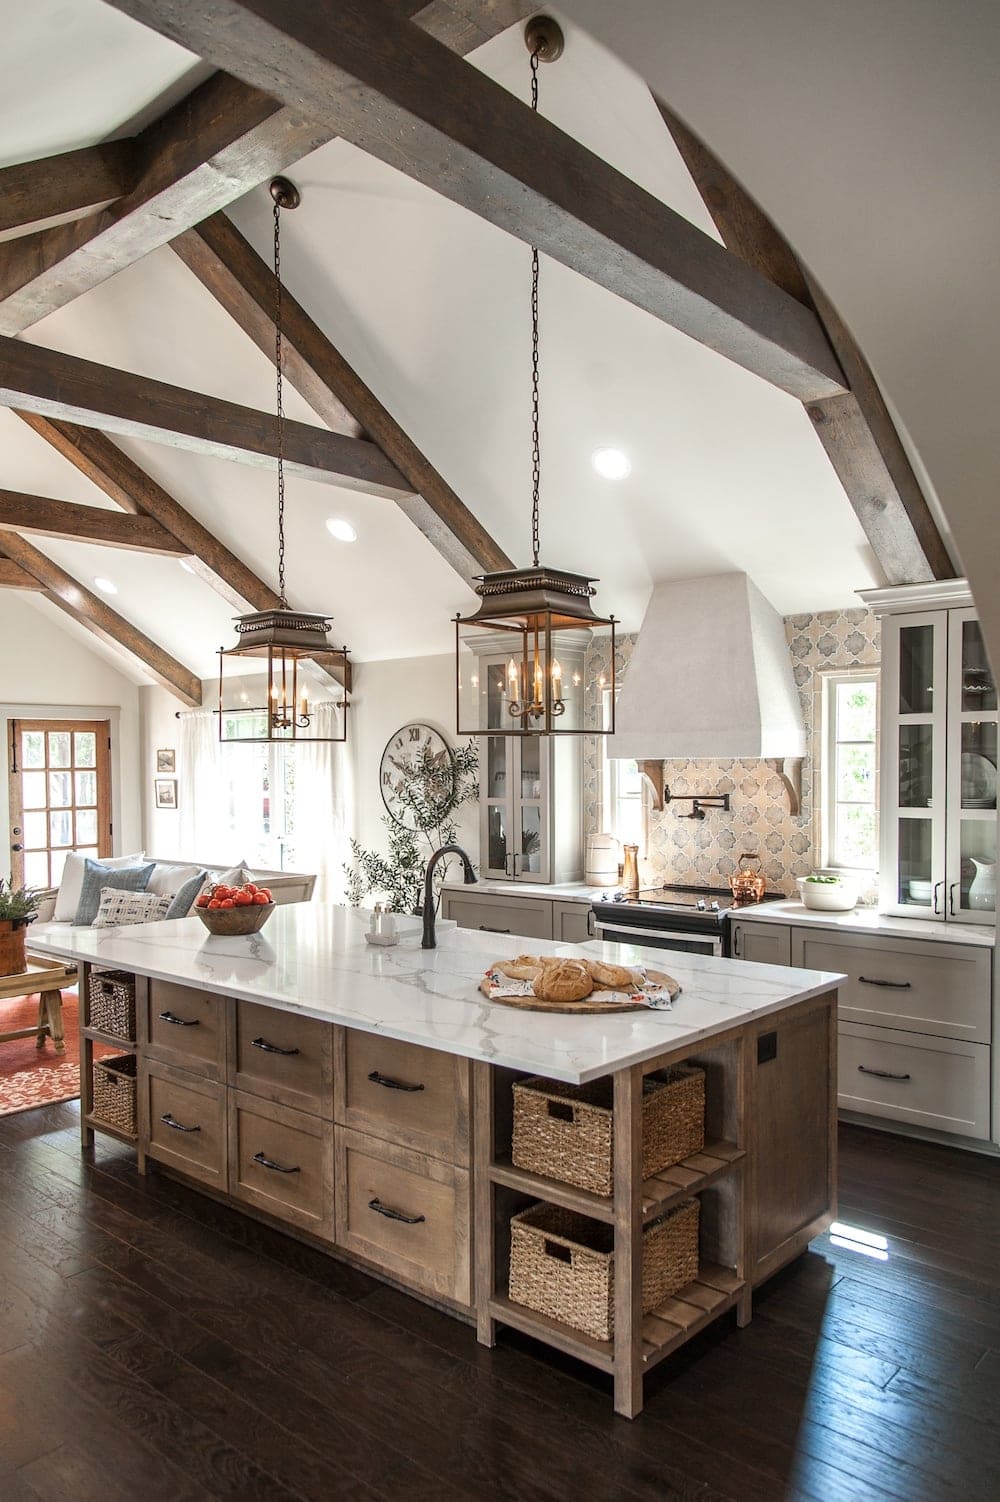 rustic wood kitchen island with white kitchen hood and french accent lanterns above the island.